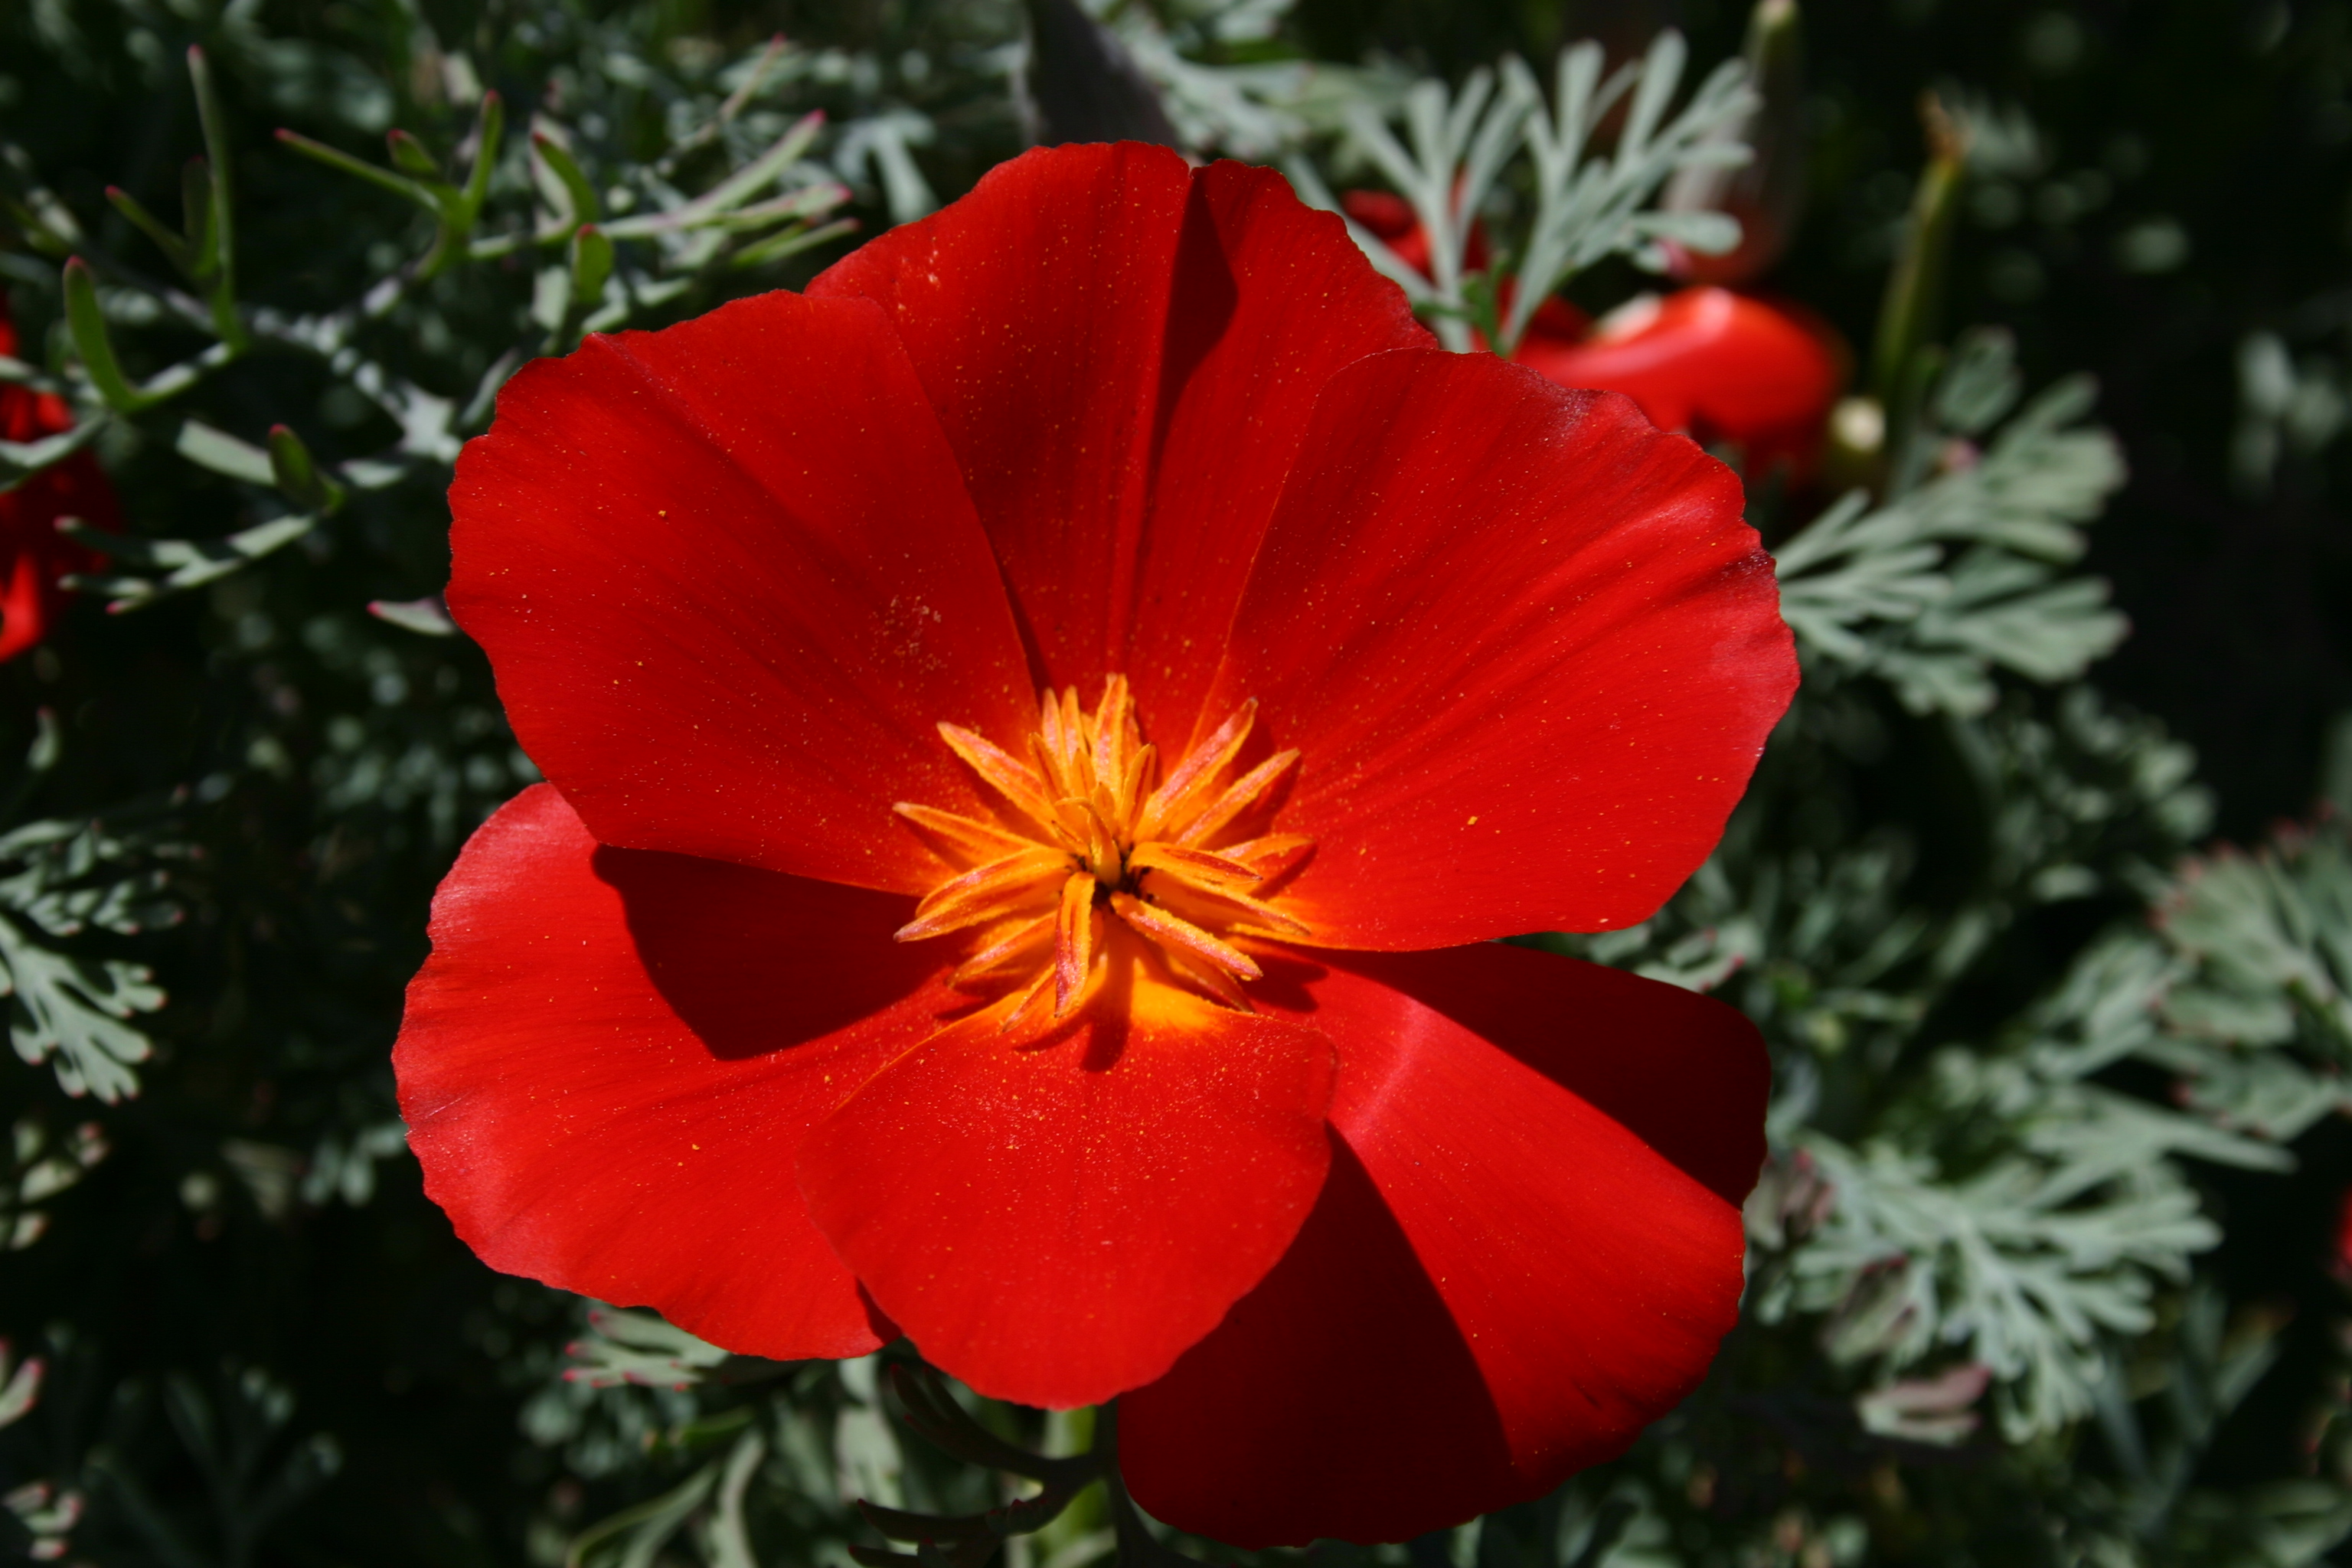 Silver Falls Seed Company - Poppy - California Red Chief